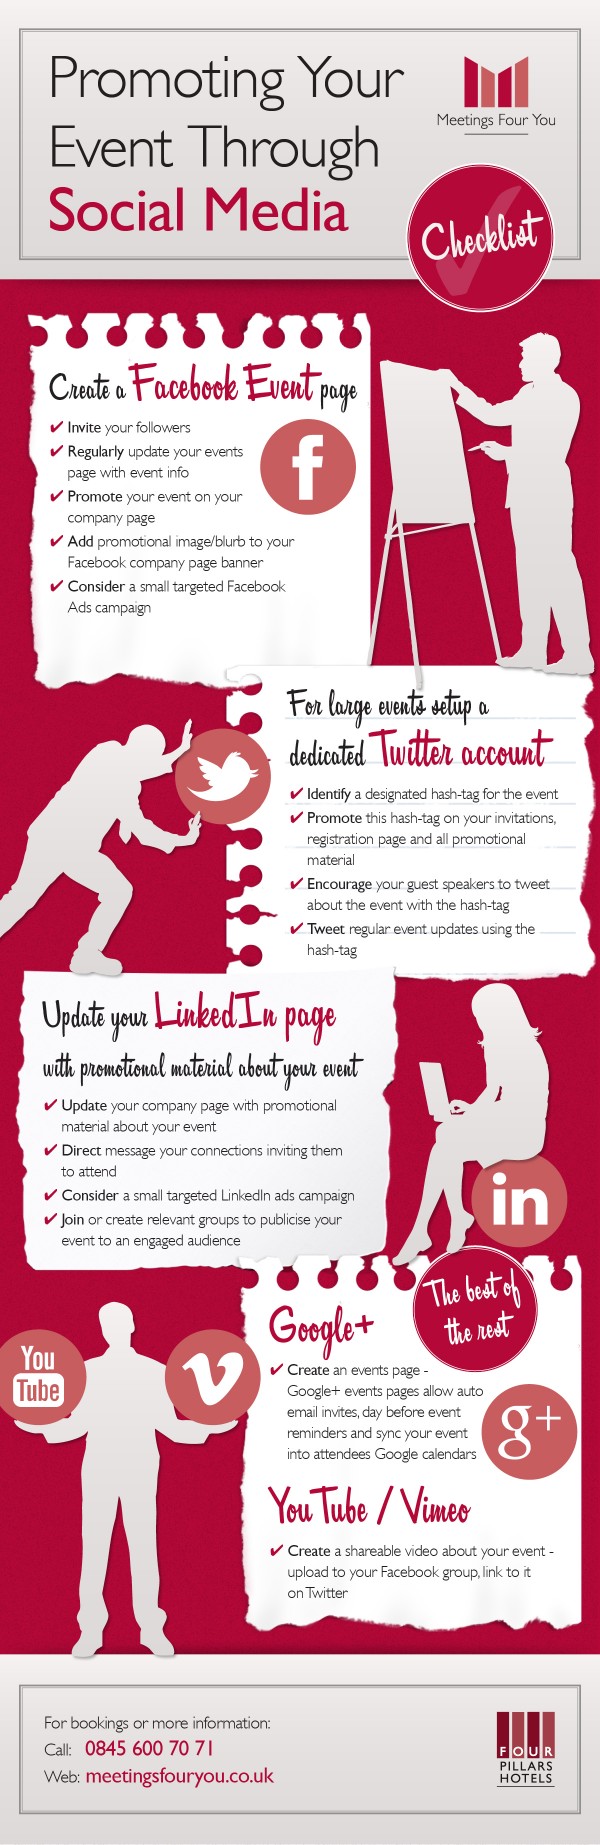 social media event promotion infographic